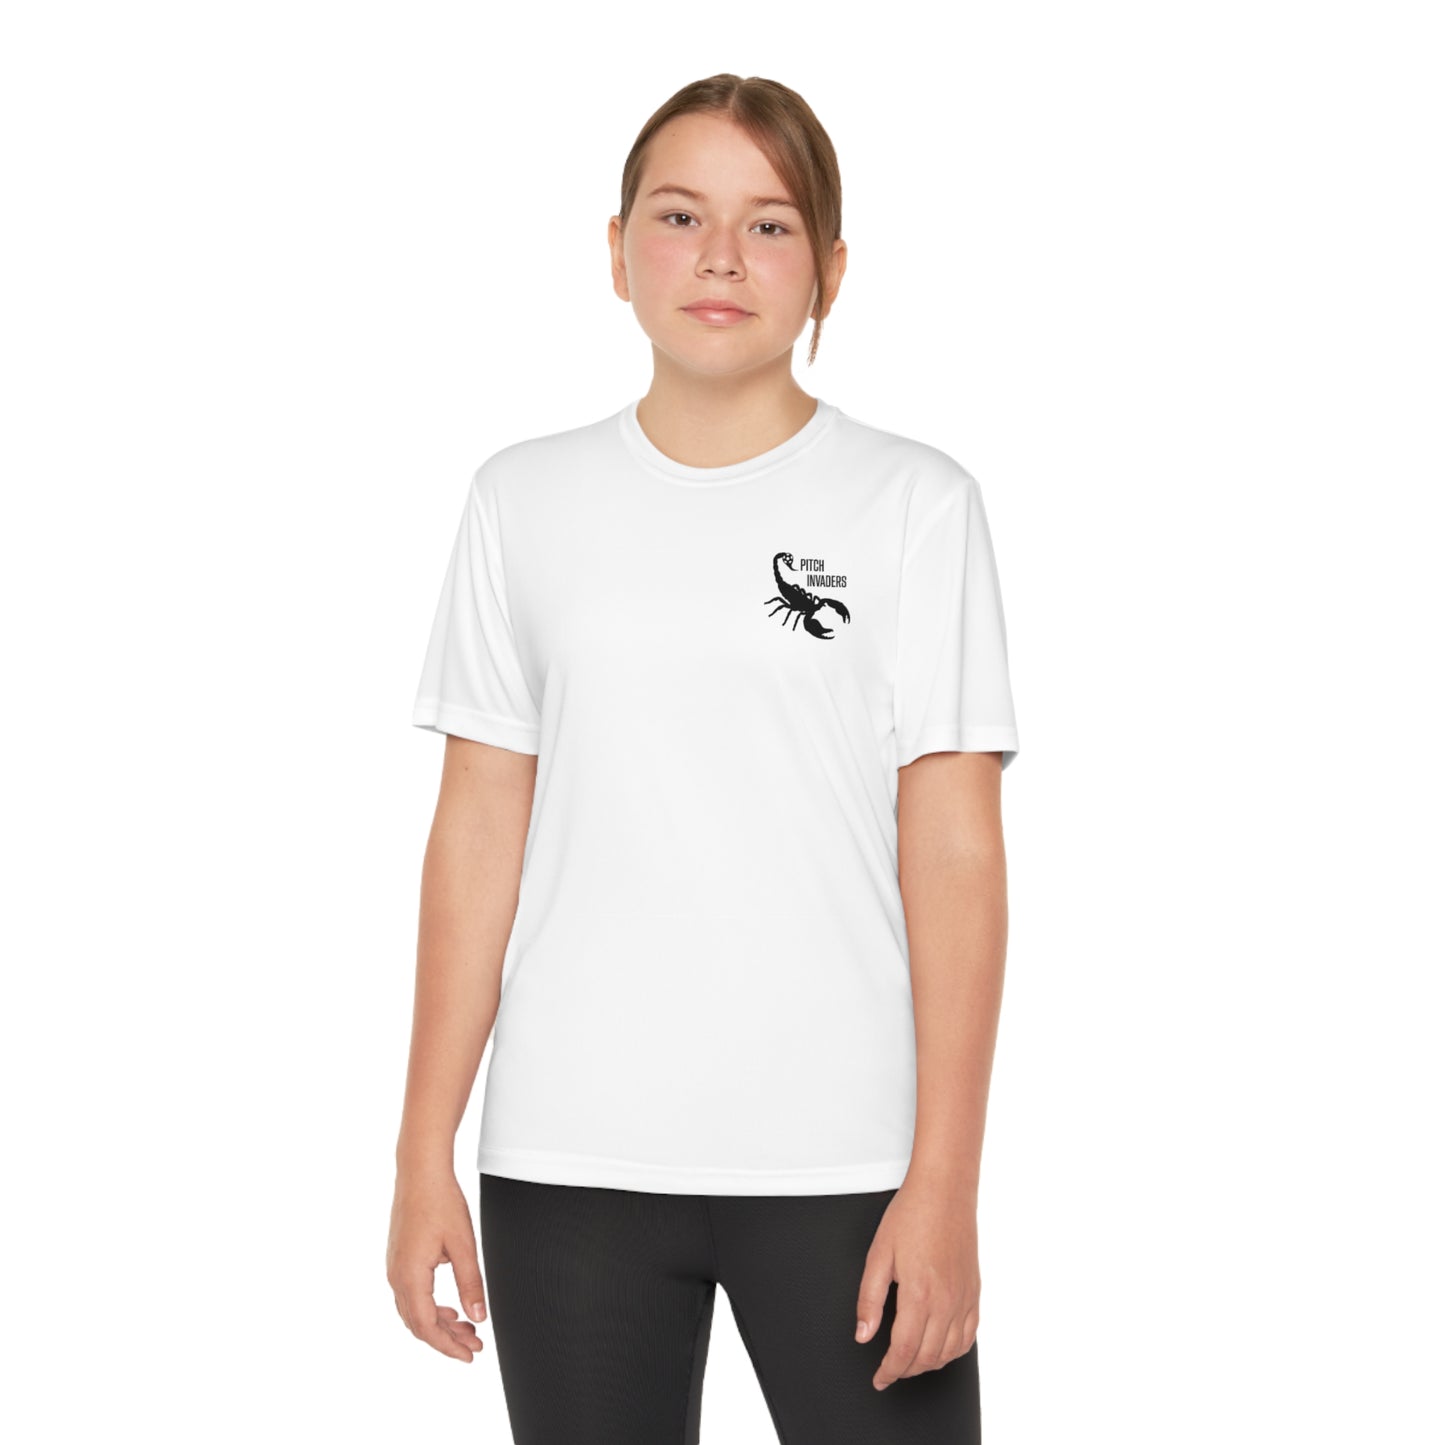 FÚTBALLERS ONLY Youth Athletic T-Shirt (Unisex)